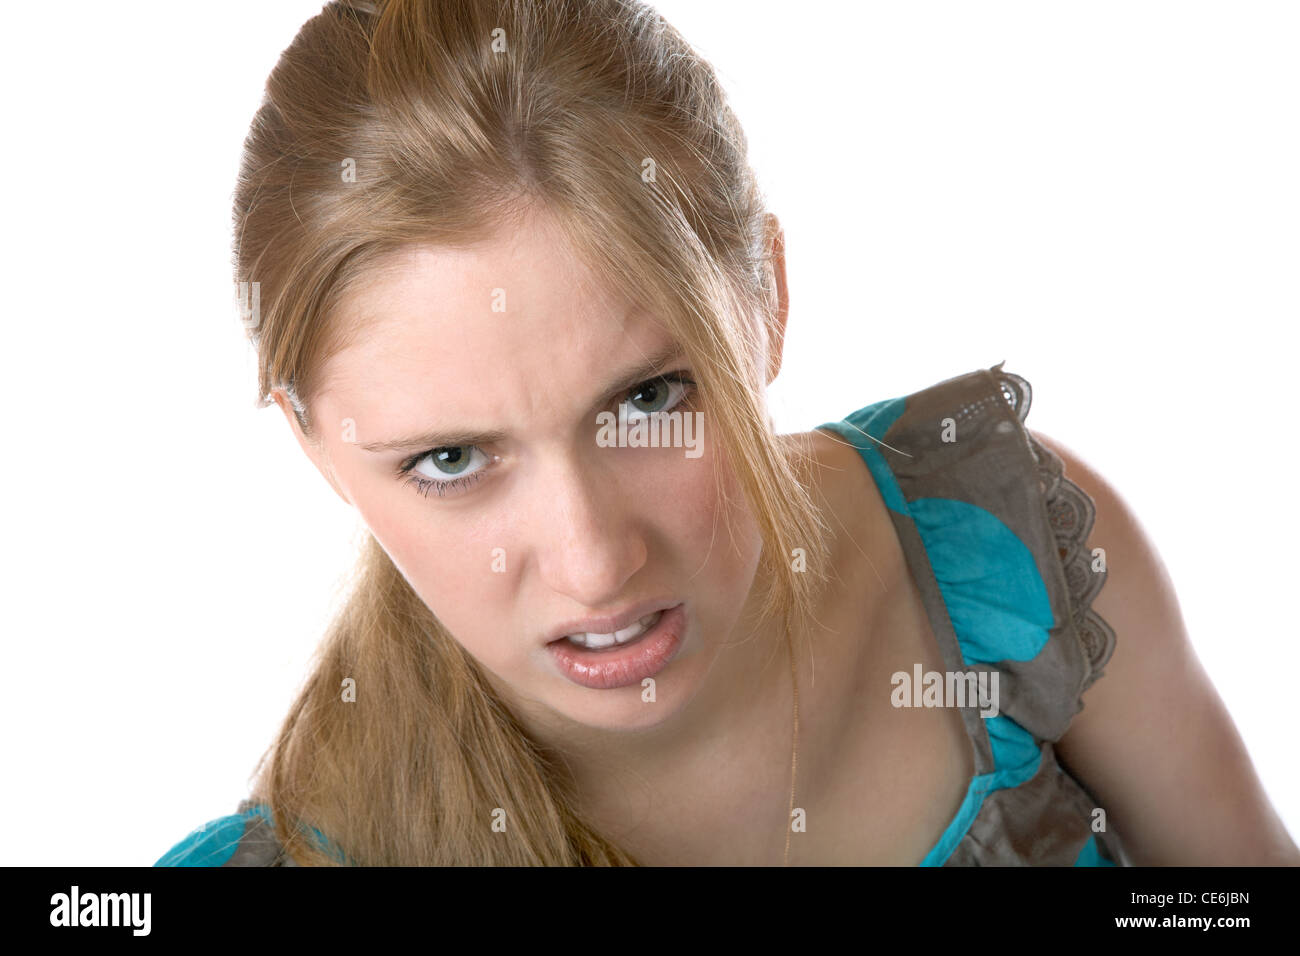 The girl shows discontent on a white background Stock Photo